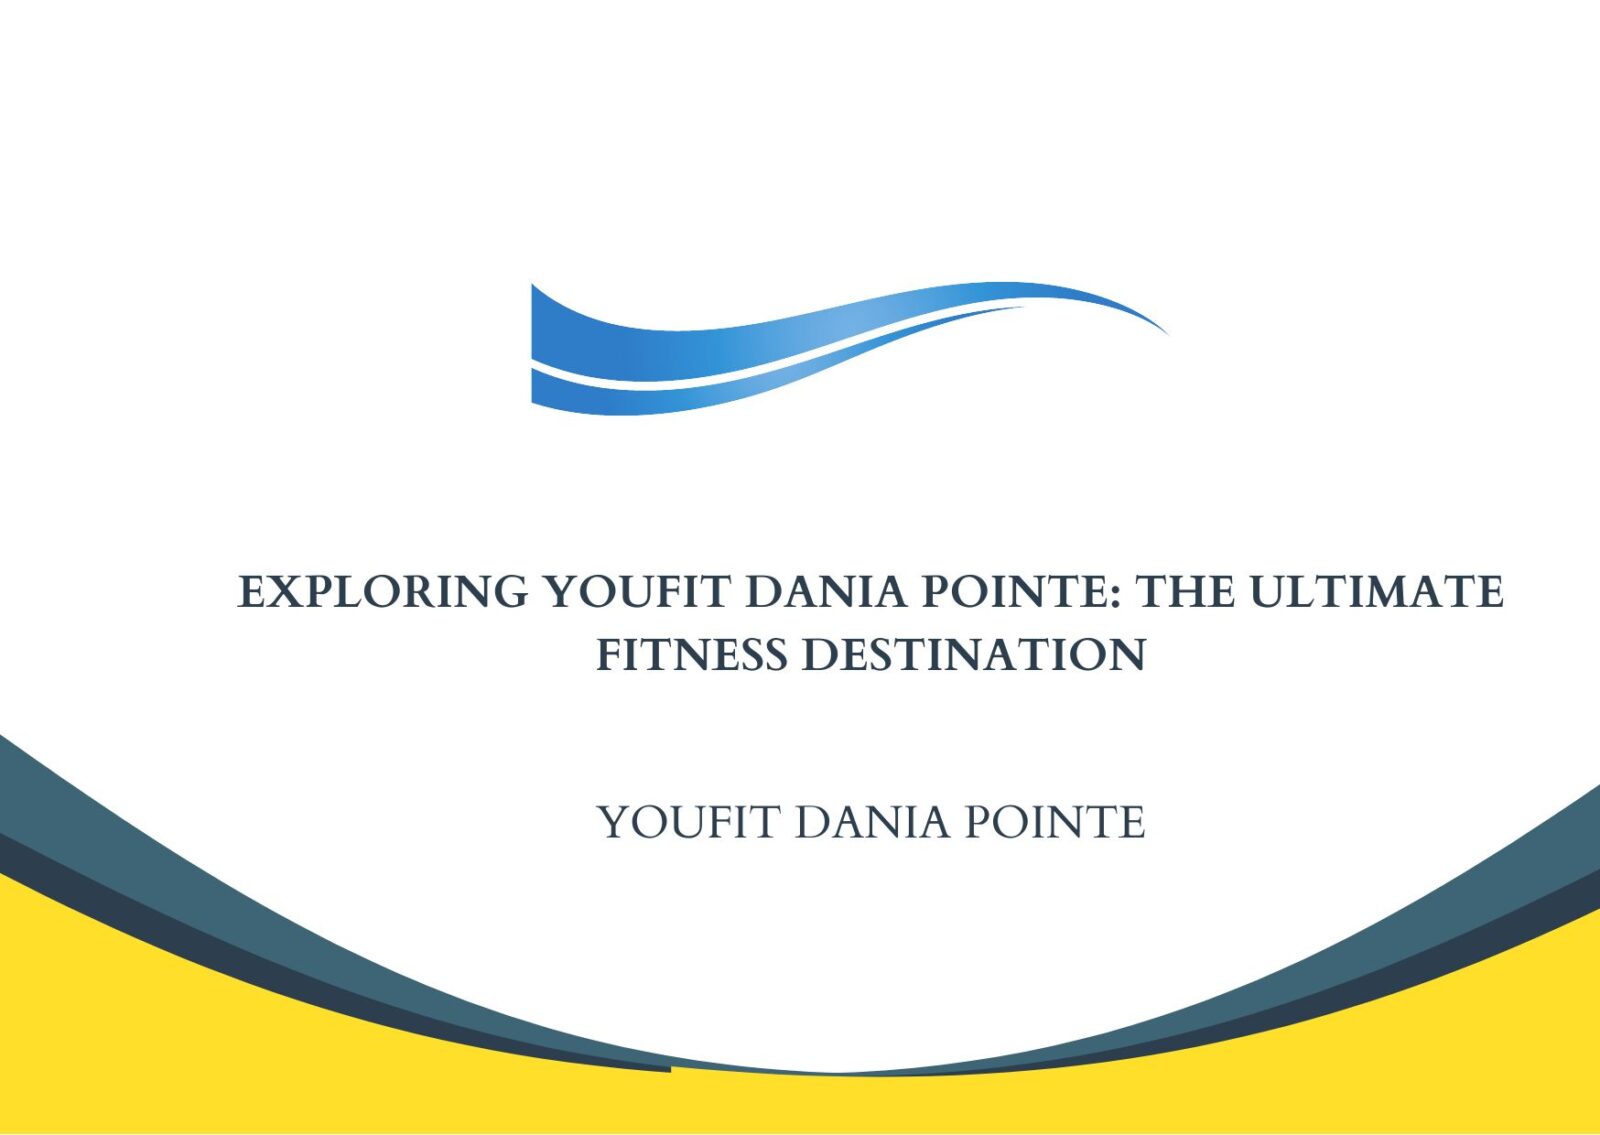 Exploring Youfit Dania Pointe: The Ultimate Fitness Destination